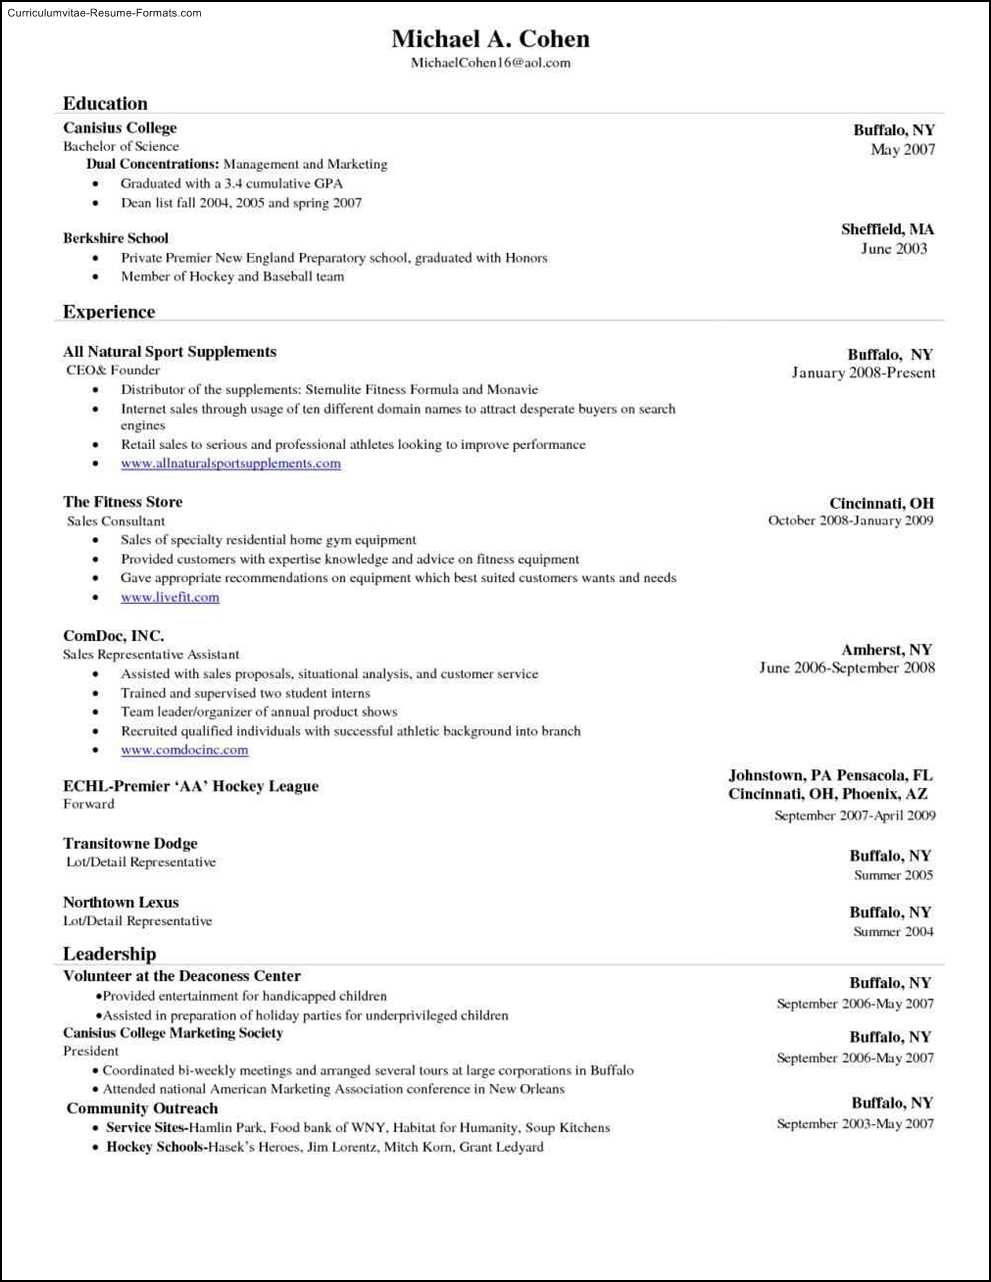 Resume Wizard In Ms Word | Professional Resumes Sample Online Throughout Resume Templates Word 2010